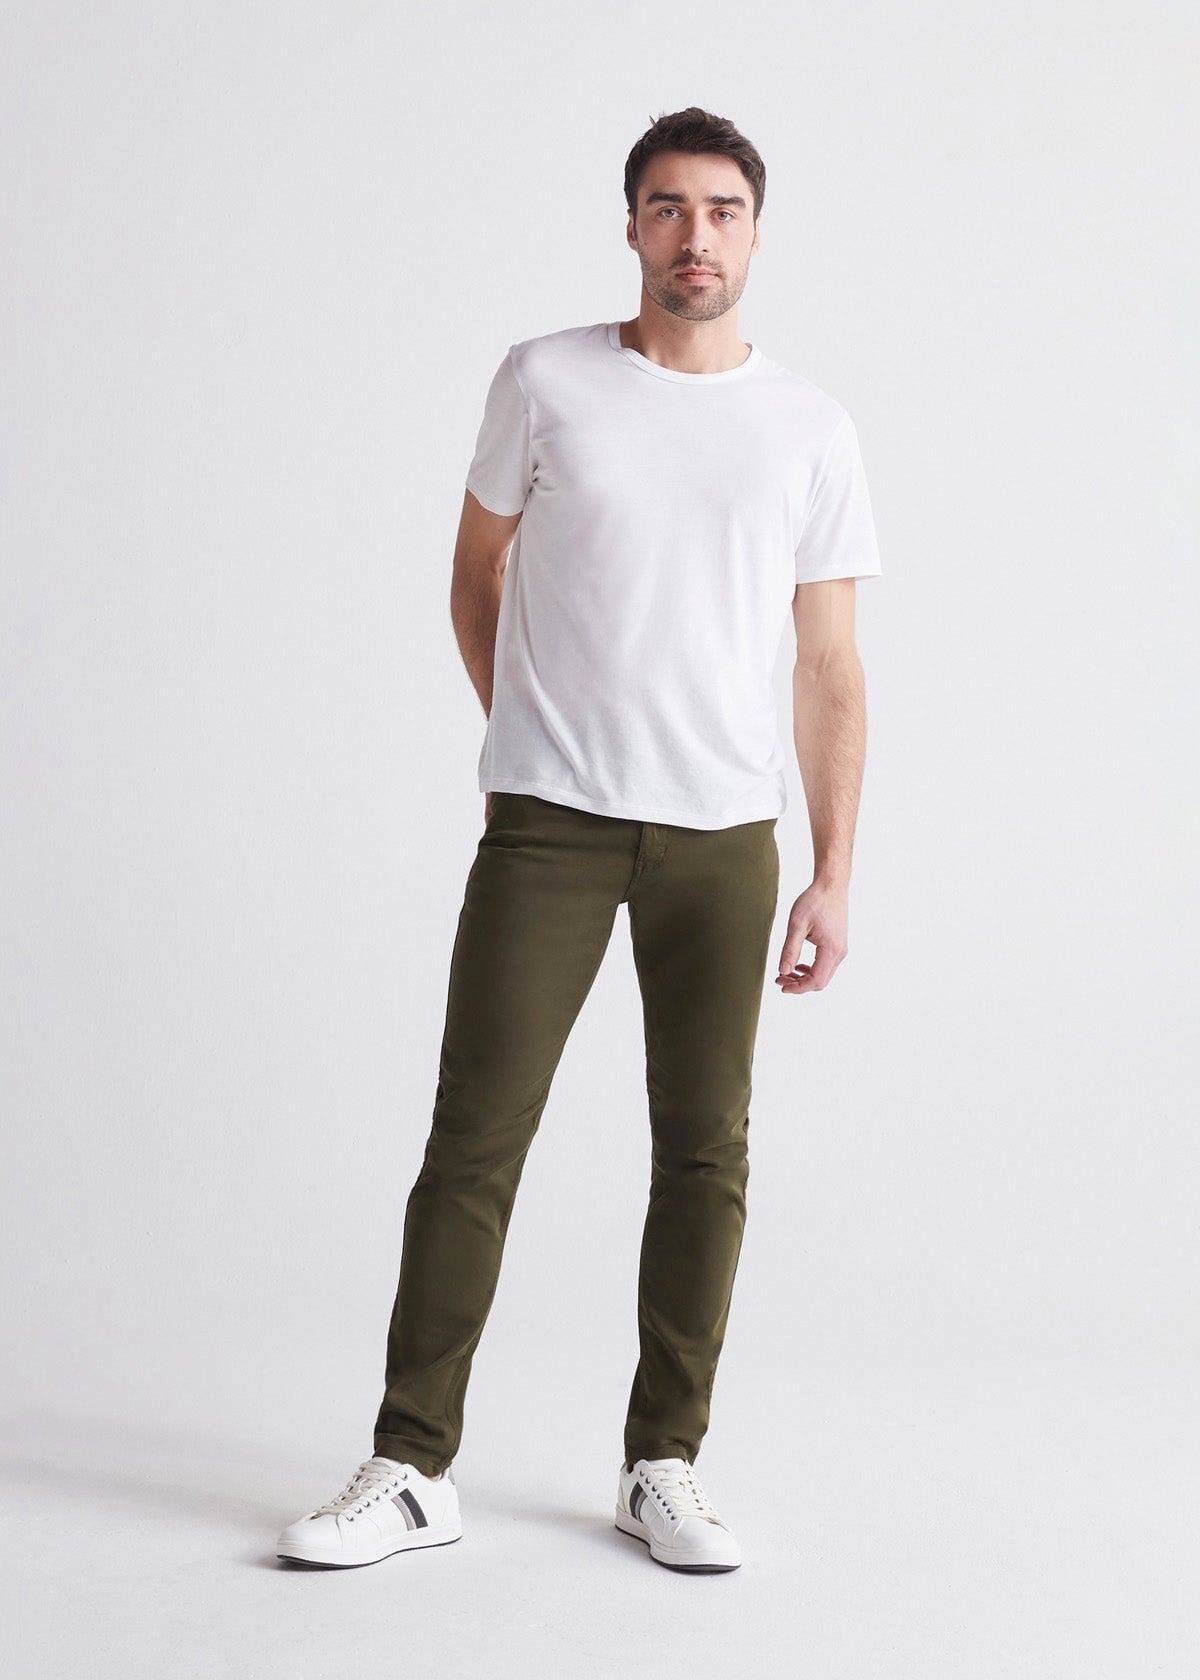 Men's Army Green Relaxed Fit Dress Sweatpant